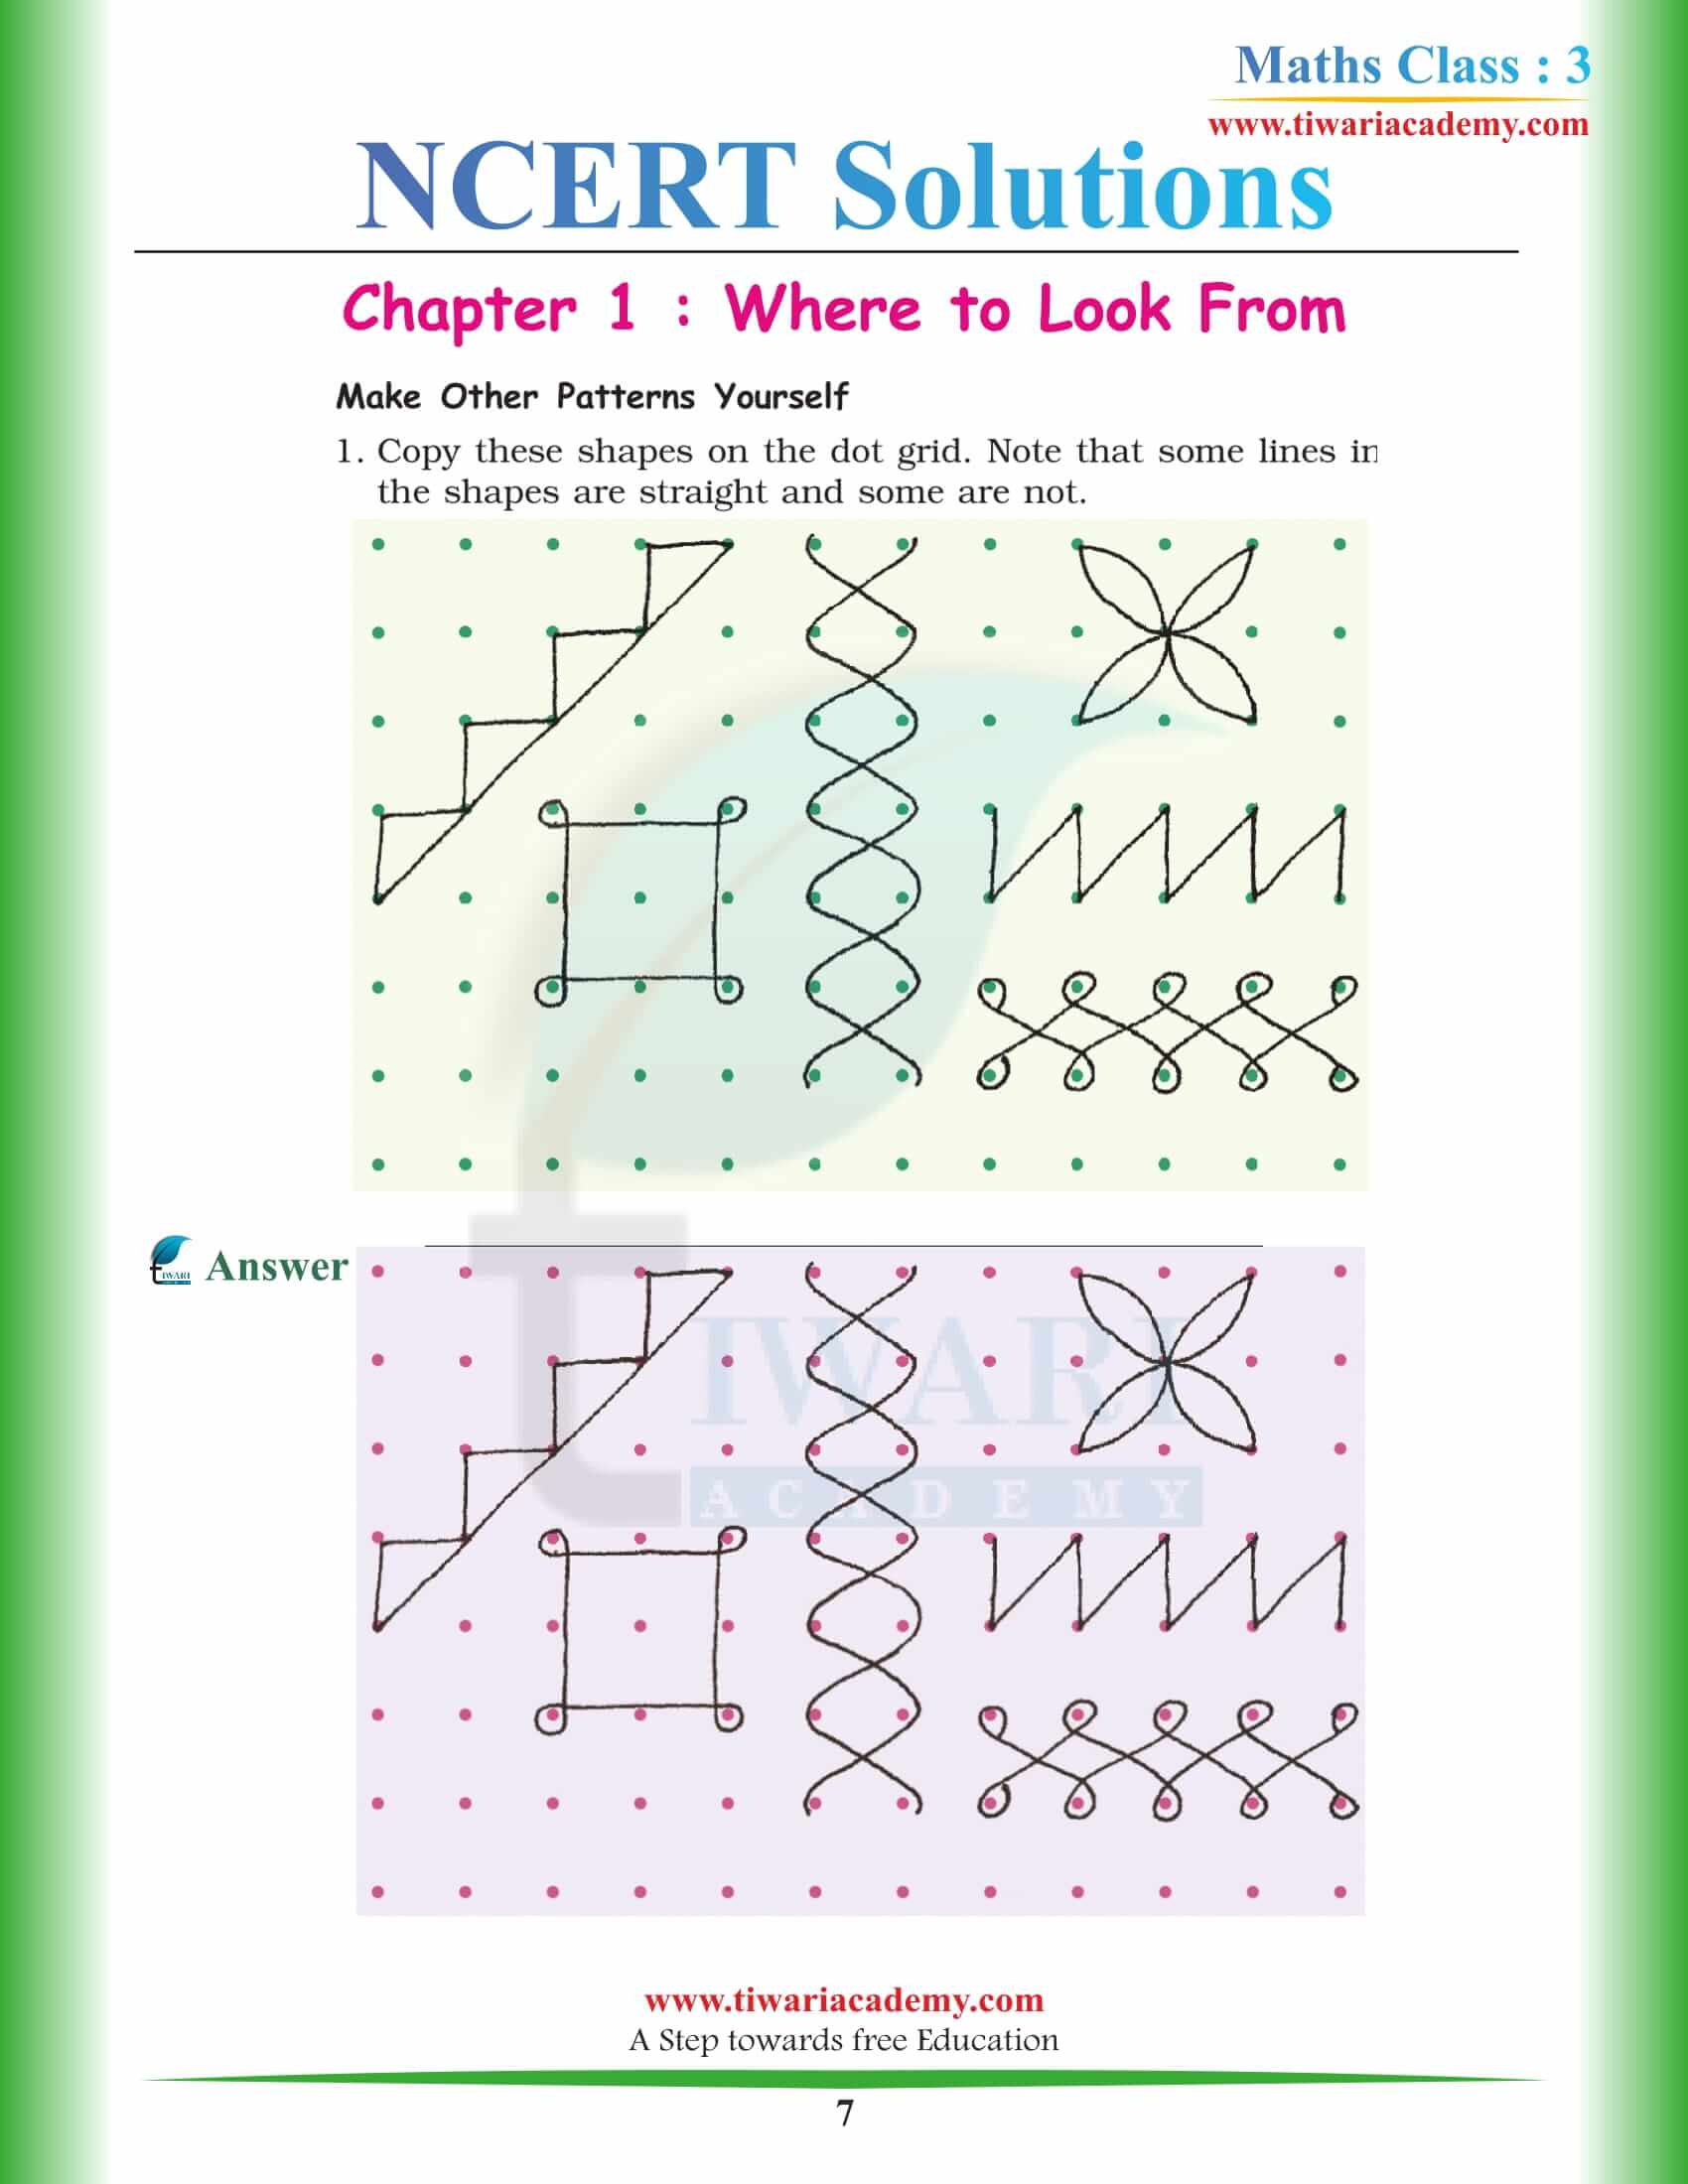 Class 3 Maths Chapter 1 Where to look from all question answers